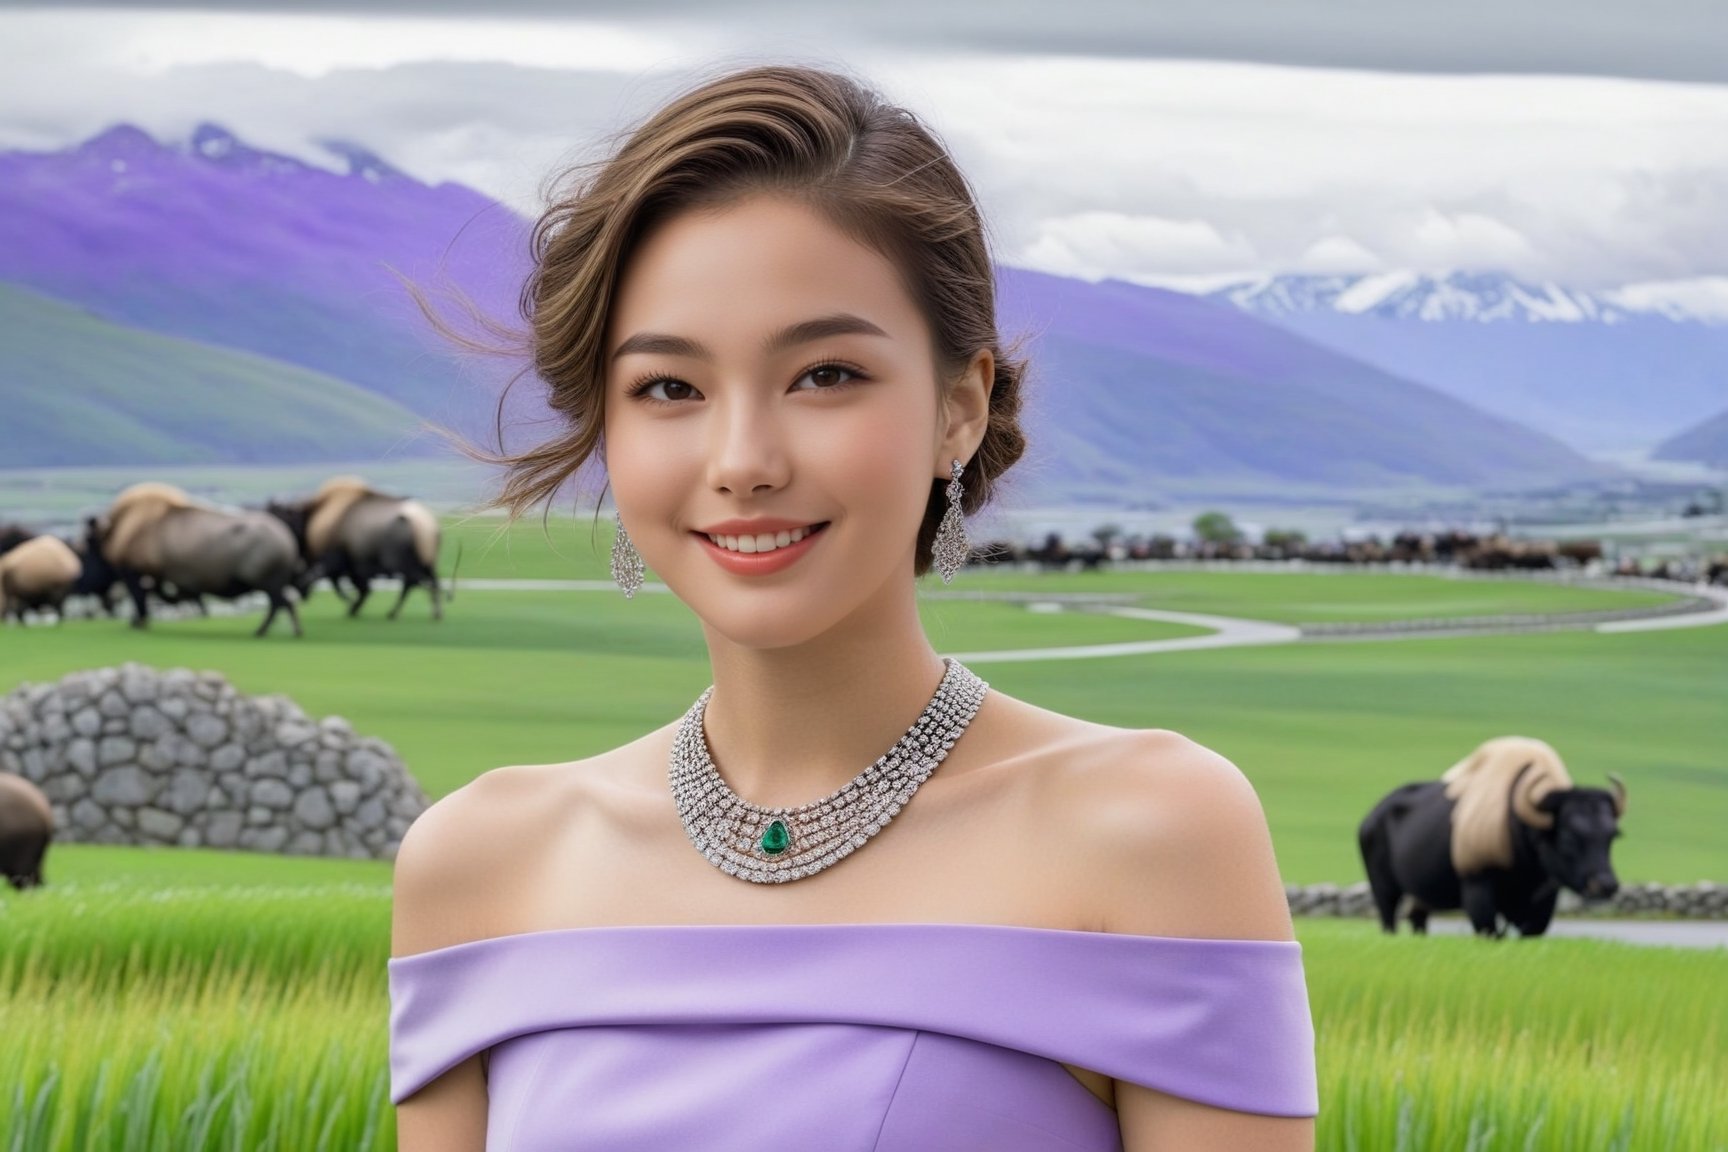 Hyper-Realistic photo of a girl,20yo,1girl,perfect female form,perfect body proportion,perfect anatomy,[Lilac Purple,Deep Coral,Green Gray,White Canvas color],elegant dress,detailed exquisite face,soft shiny skin,smile,mesmerizing,short hair,small earrings,necklaces,Chanel bag,cluttered maximalism
BREAK
(backdrop of lamarva11ey,outdoors,sky,day, cloud,tree,cloudy sky,grass,nature,beautiful scenery,mountain,winding road,landscape,american bisons),(girl focus:1.2)
BREAK
(rule of thirds:1.3),perfect composition,studio photo,trending on artstation,(Masterpiece,Best quality,32k,UHD:1.4),(sharp focus,high contrast,HDR,hyper-detailed,intricate details,ultra-realistic,award-winning photo,ultra-clear,kodachrome 800:1.25),(infinite depth of perspective:2),(chiaroscuro lighting,soft rim lighting:1.15),by Karol Bak,Antonio Lopez,Gustav Klimt and Hayao Miyazaki,photo_b00ster,real_booster,art_booster,Ye11owst0ne,ct-goeuun